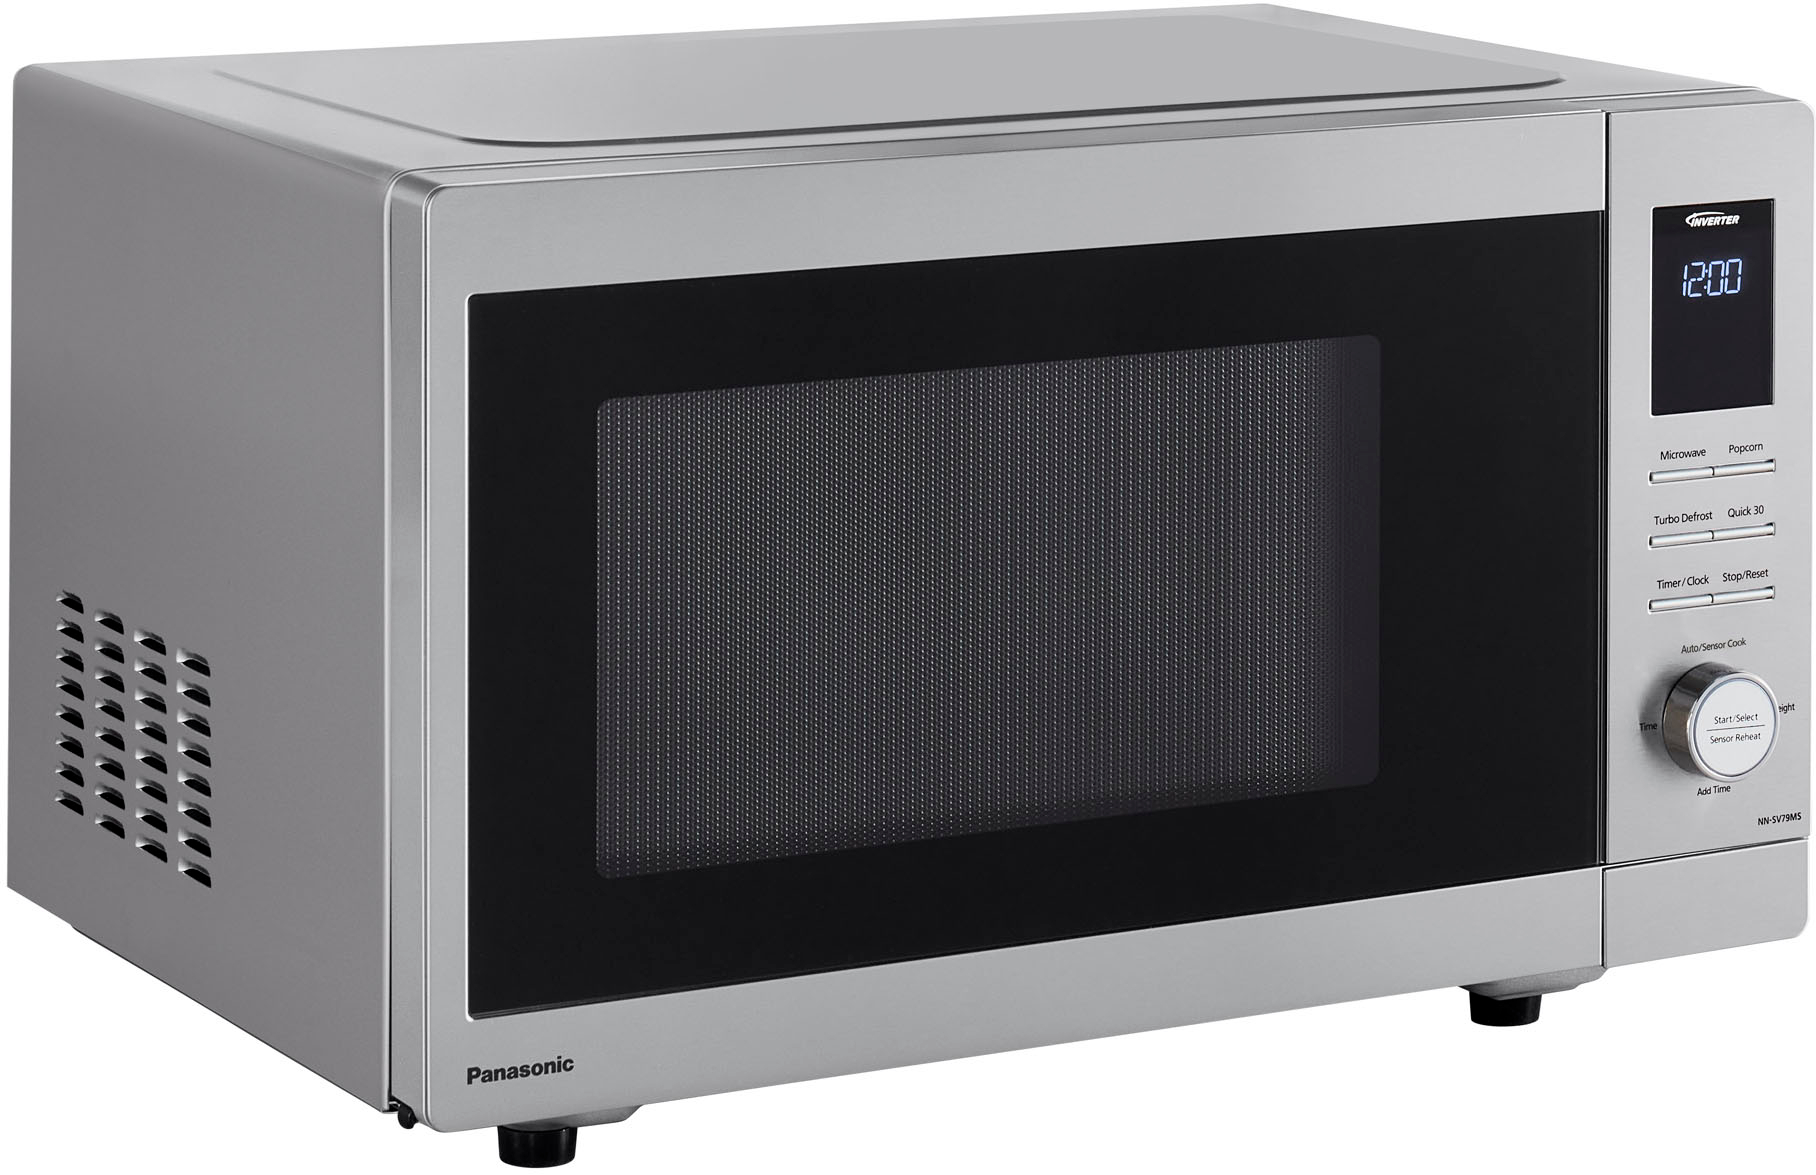 Panasonic NN-SV79MS 1.4 Cu. Ft. Countertop Microwave Oven with 